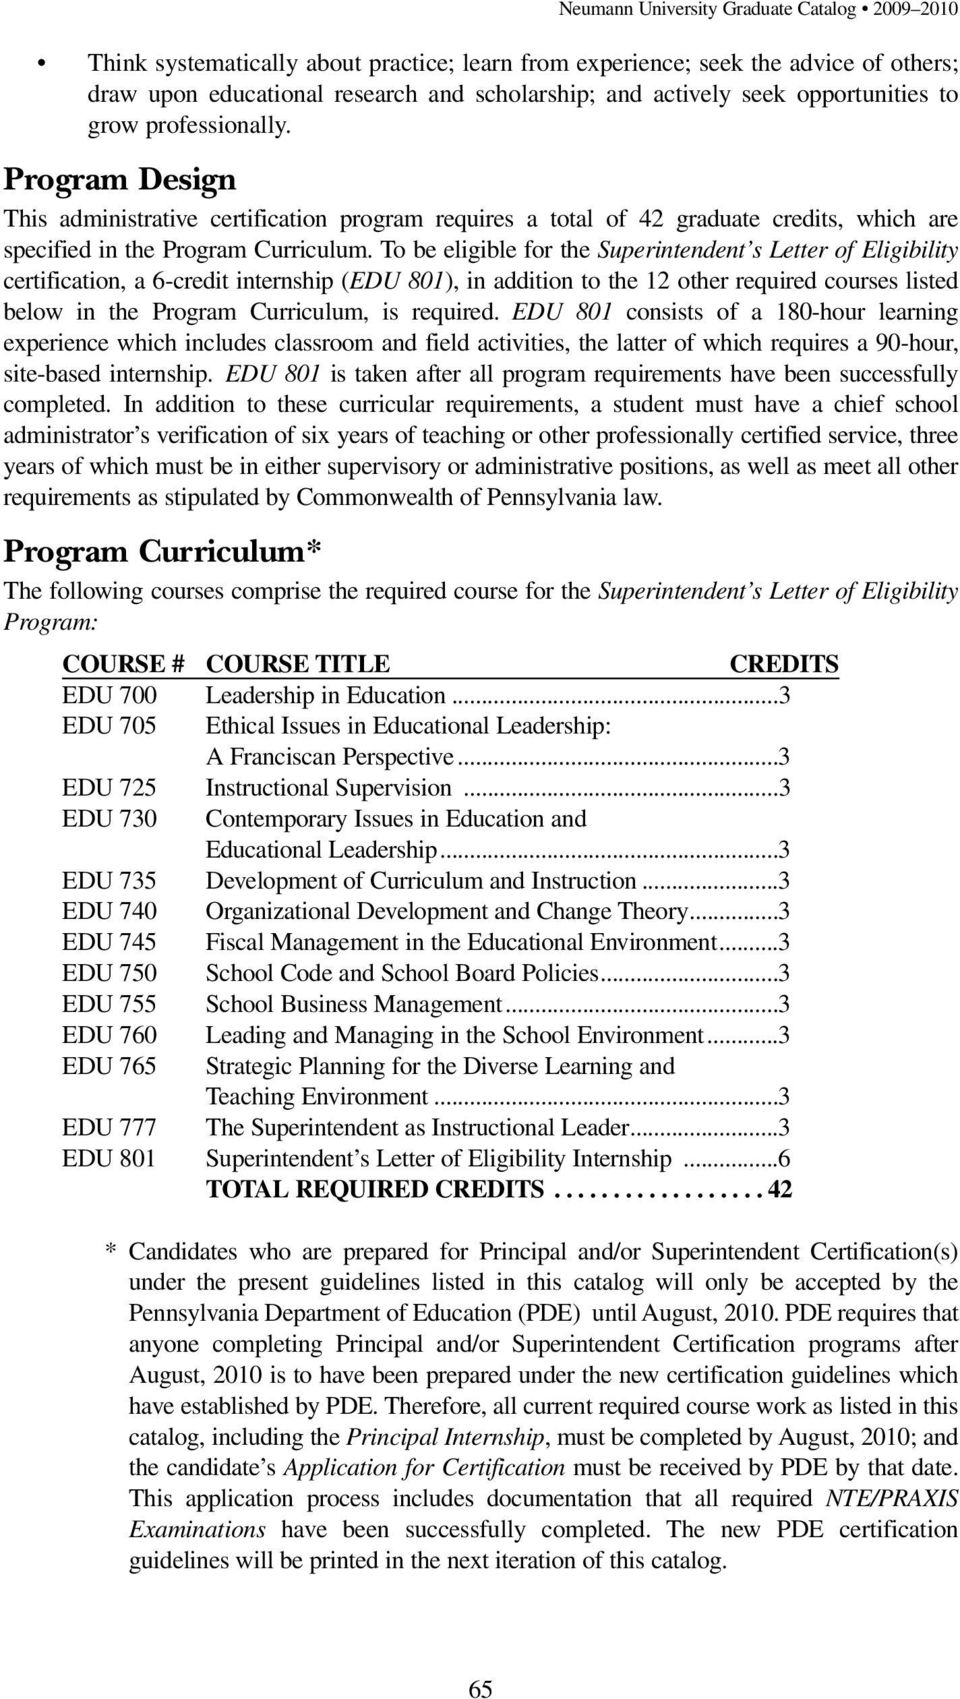 To be eligible for the Superintendent s Letter of Eligibility certification, a 6-credit internship (EDU 801), in addition to the 12 other required courses listed below in the Program Curriculum, is